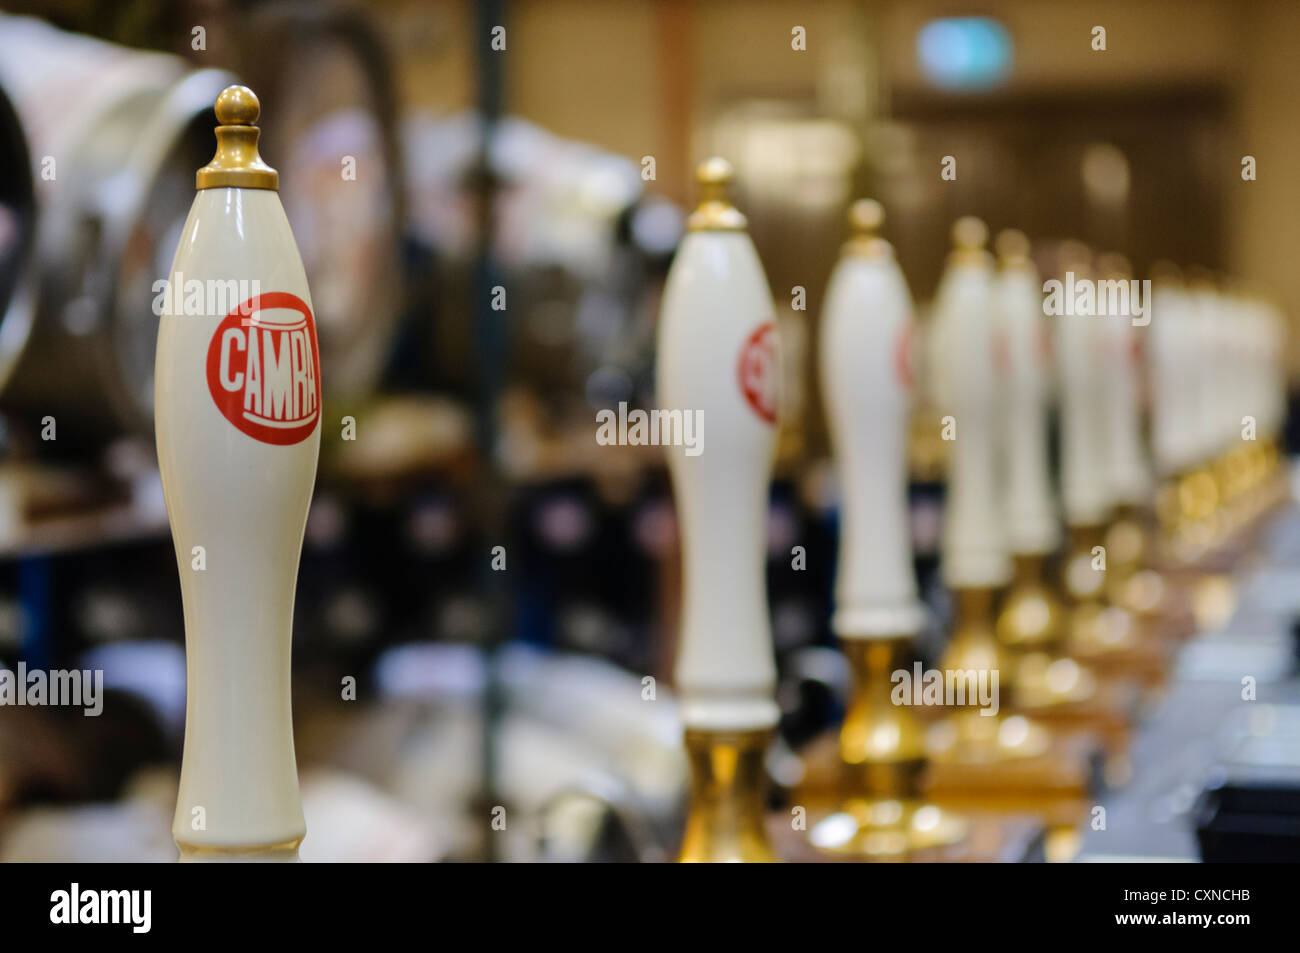 Row of beer pumps at a CAMRA (Campaign for Real Ale) beer and cider festival Stock Photo